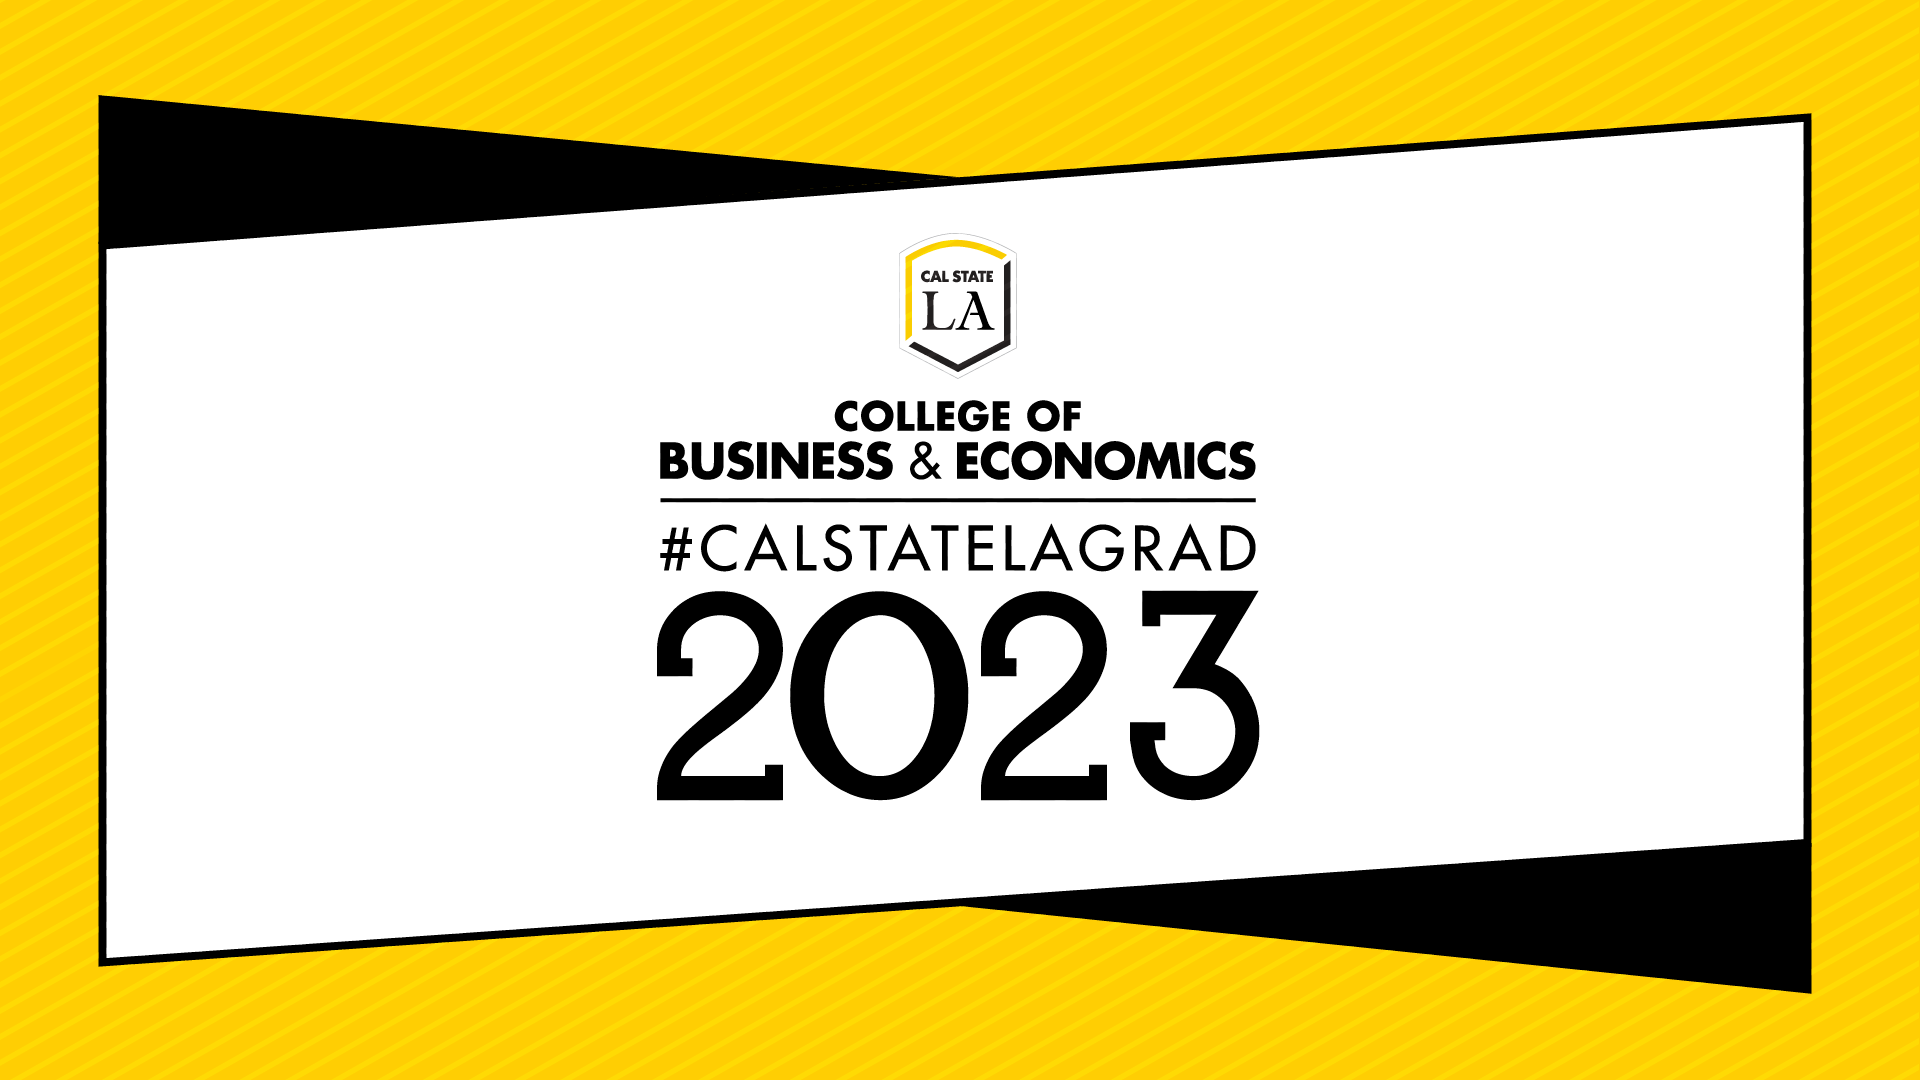 #CALSTATELAGRAD 2023 College of Business and Economics social media graphic (gold)